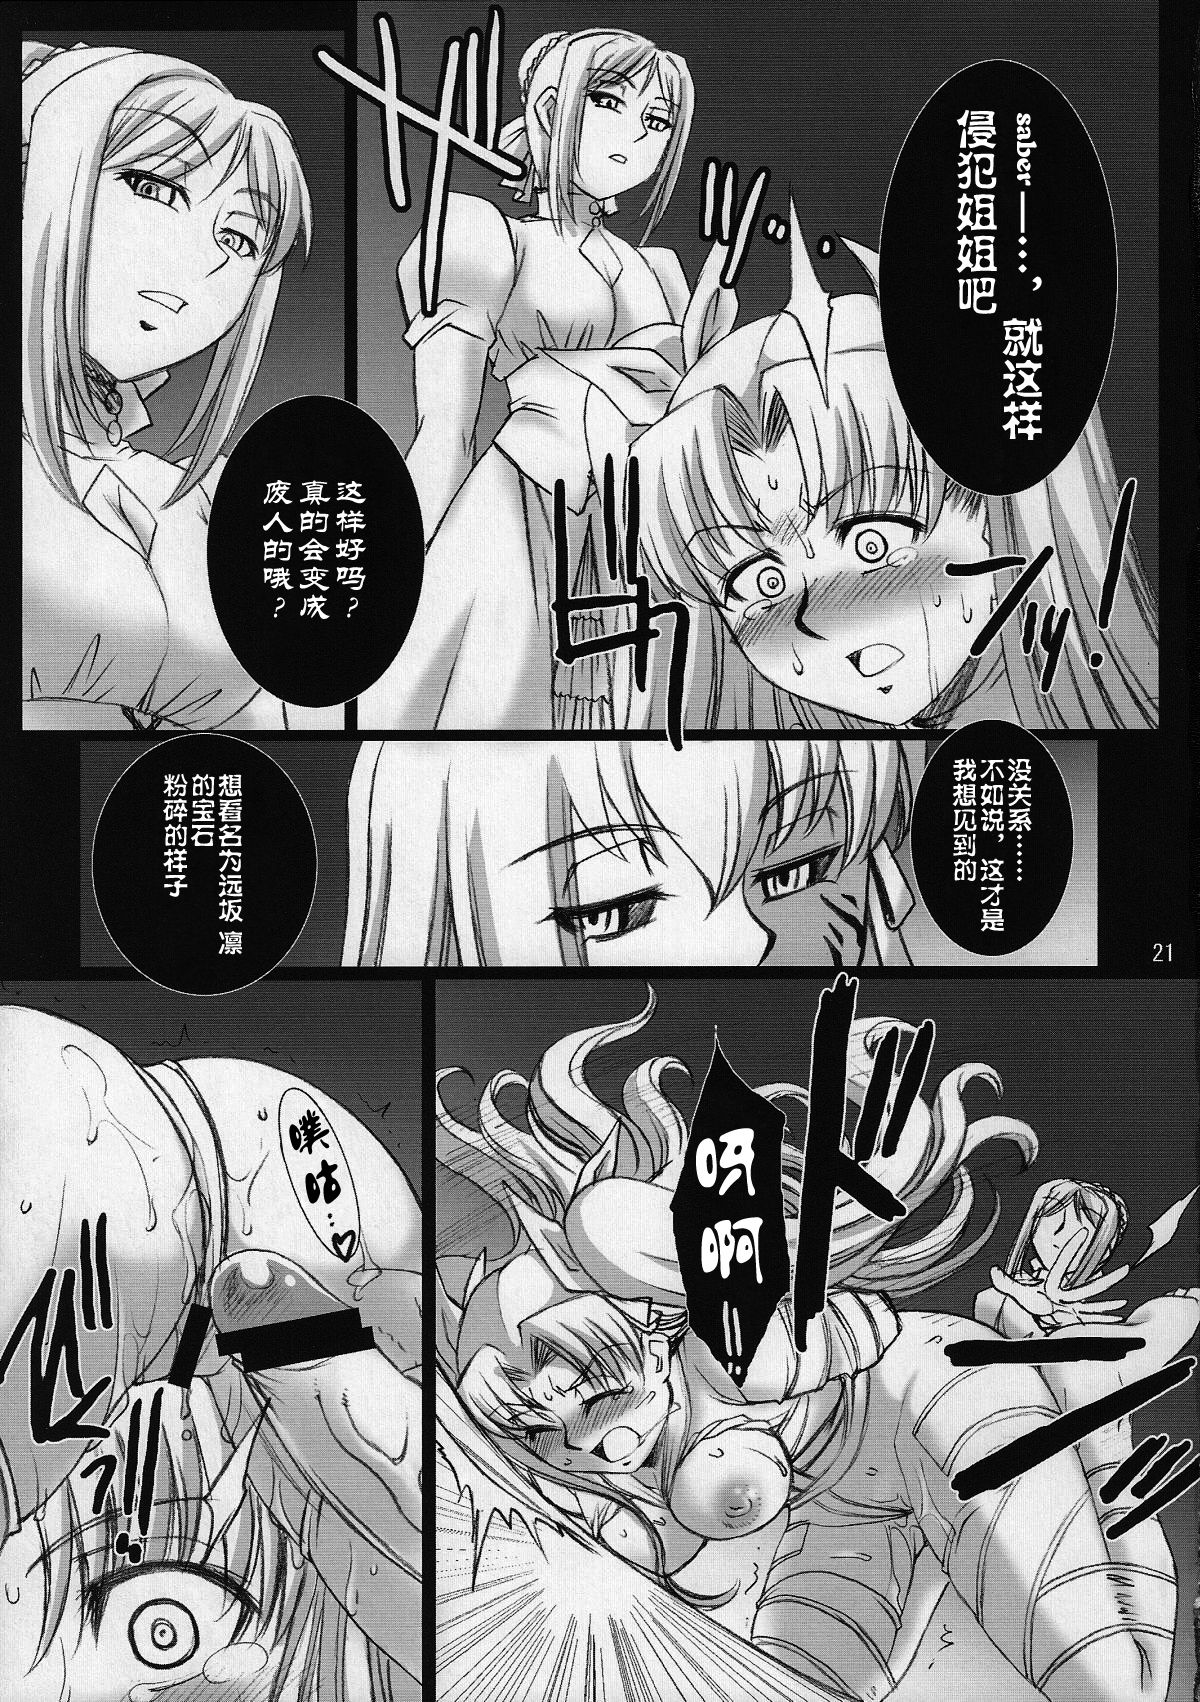 (COMIC1☆2) [H.B (B-RIVER)] Red Degeneration -DAY/3- (Fate/stay night) [Chinese] [不咕鸟汉化组] page 20 full